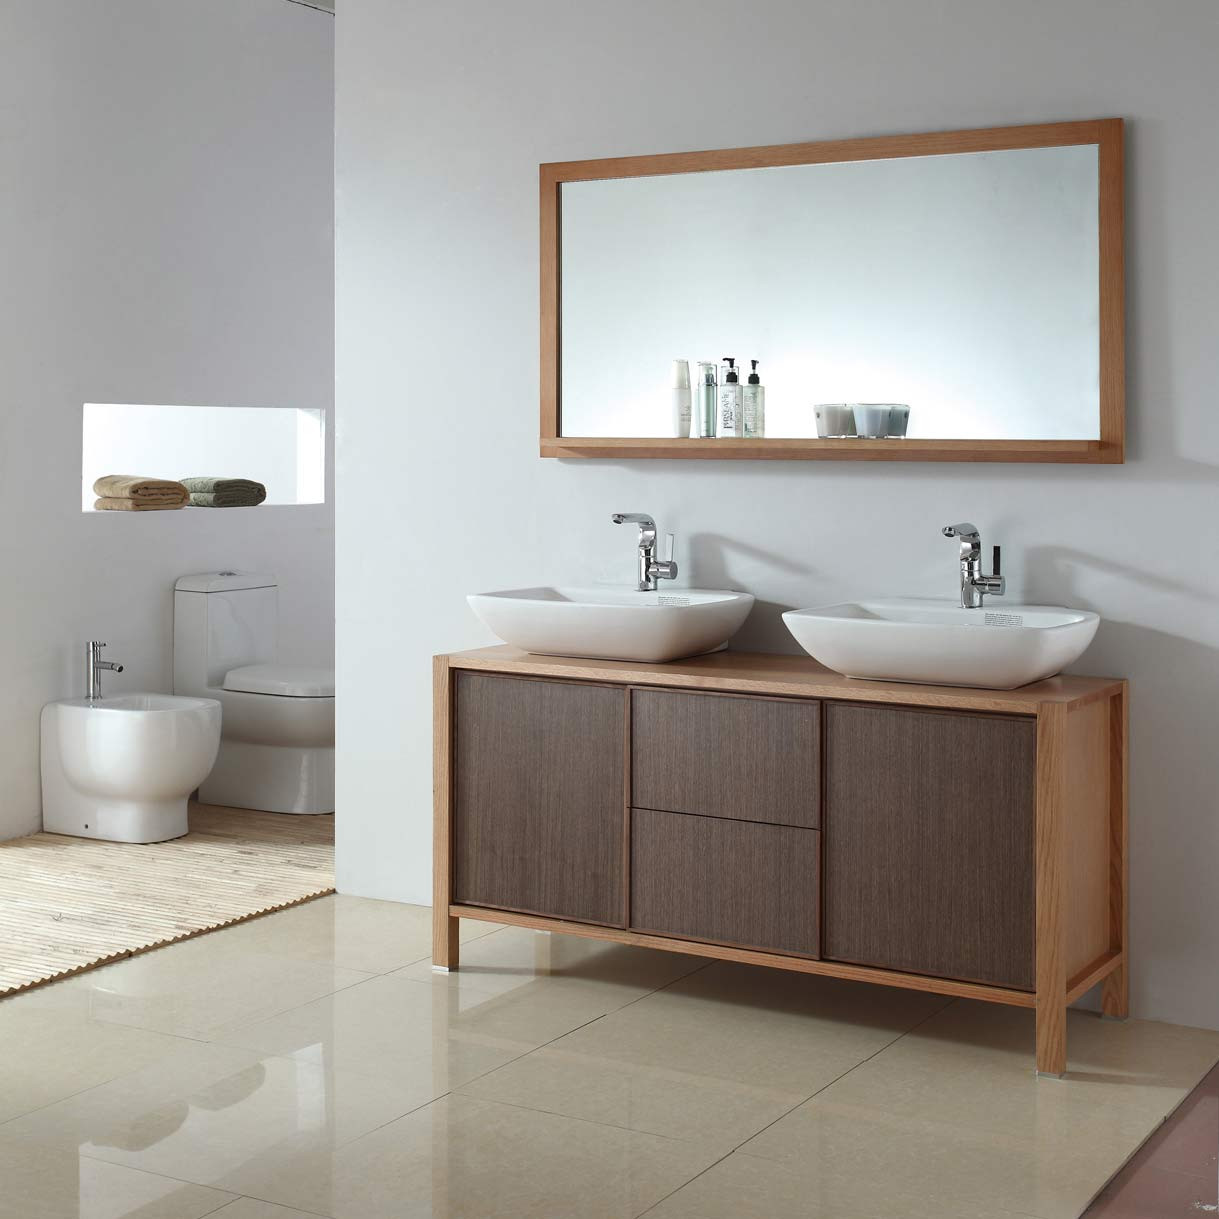 Bathroom Mirrors Over Vanity
 Things You Haven’t Known Before About Bathroom Vanity